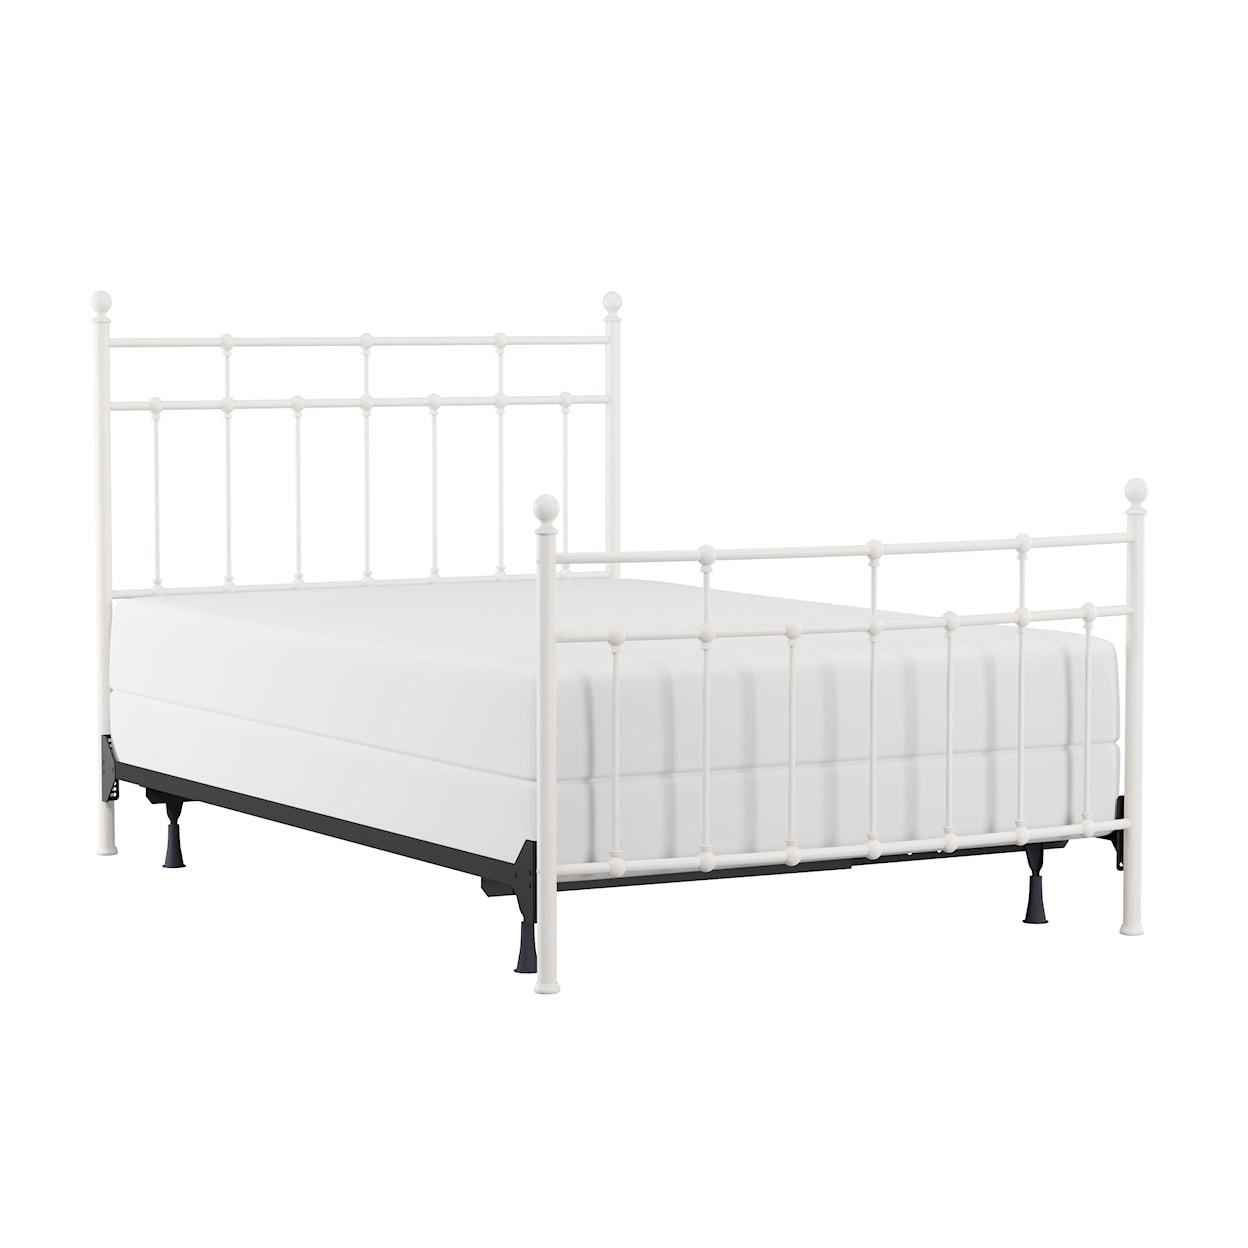 Hillsdale Providence Full Bed